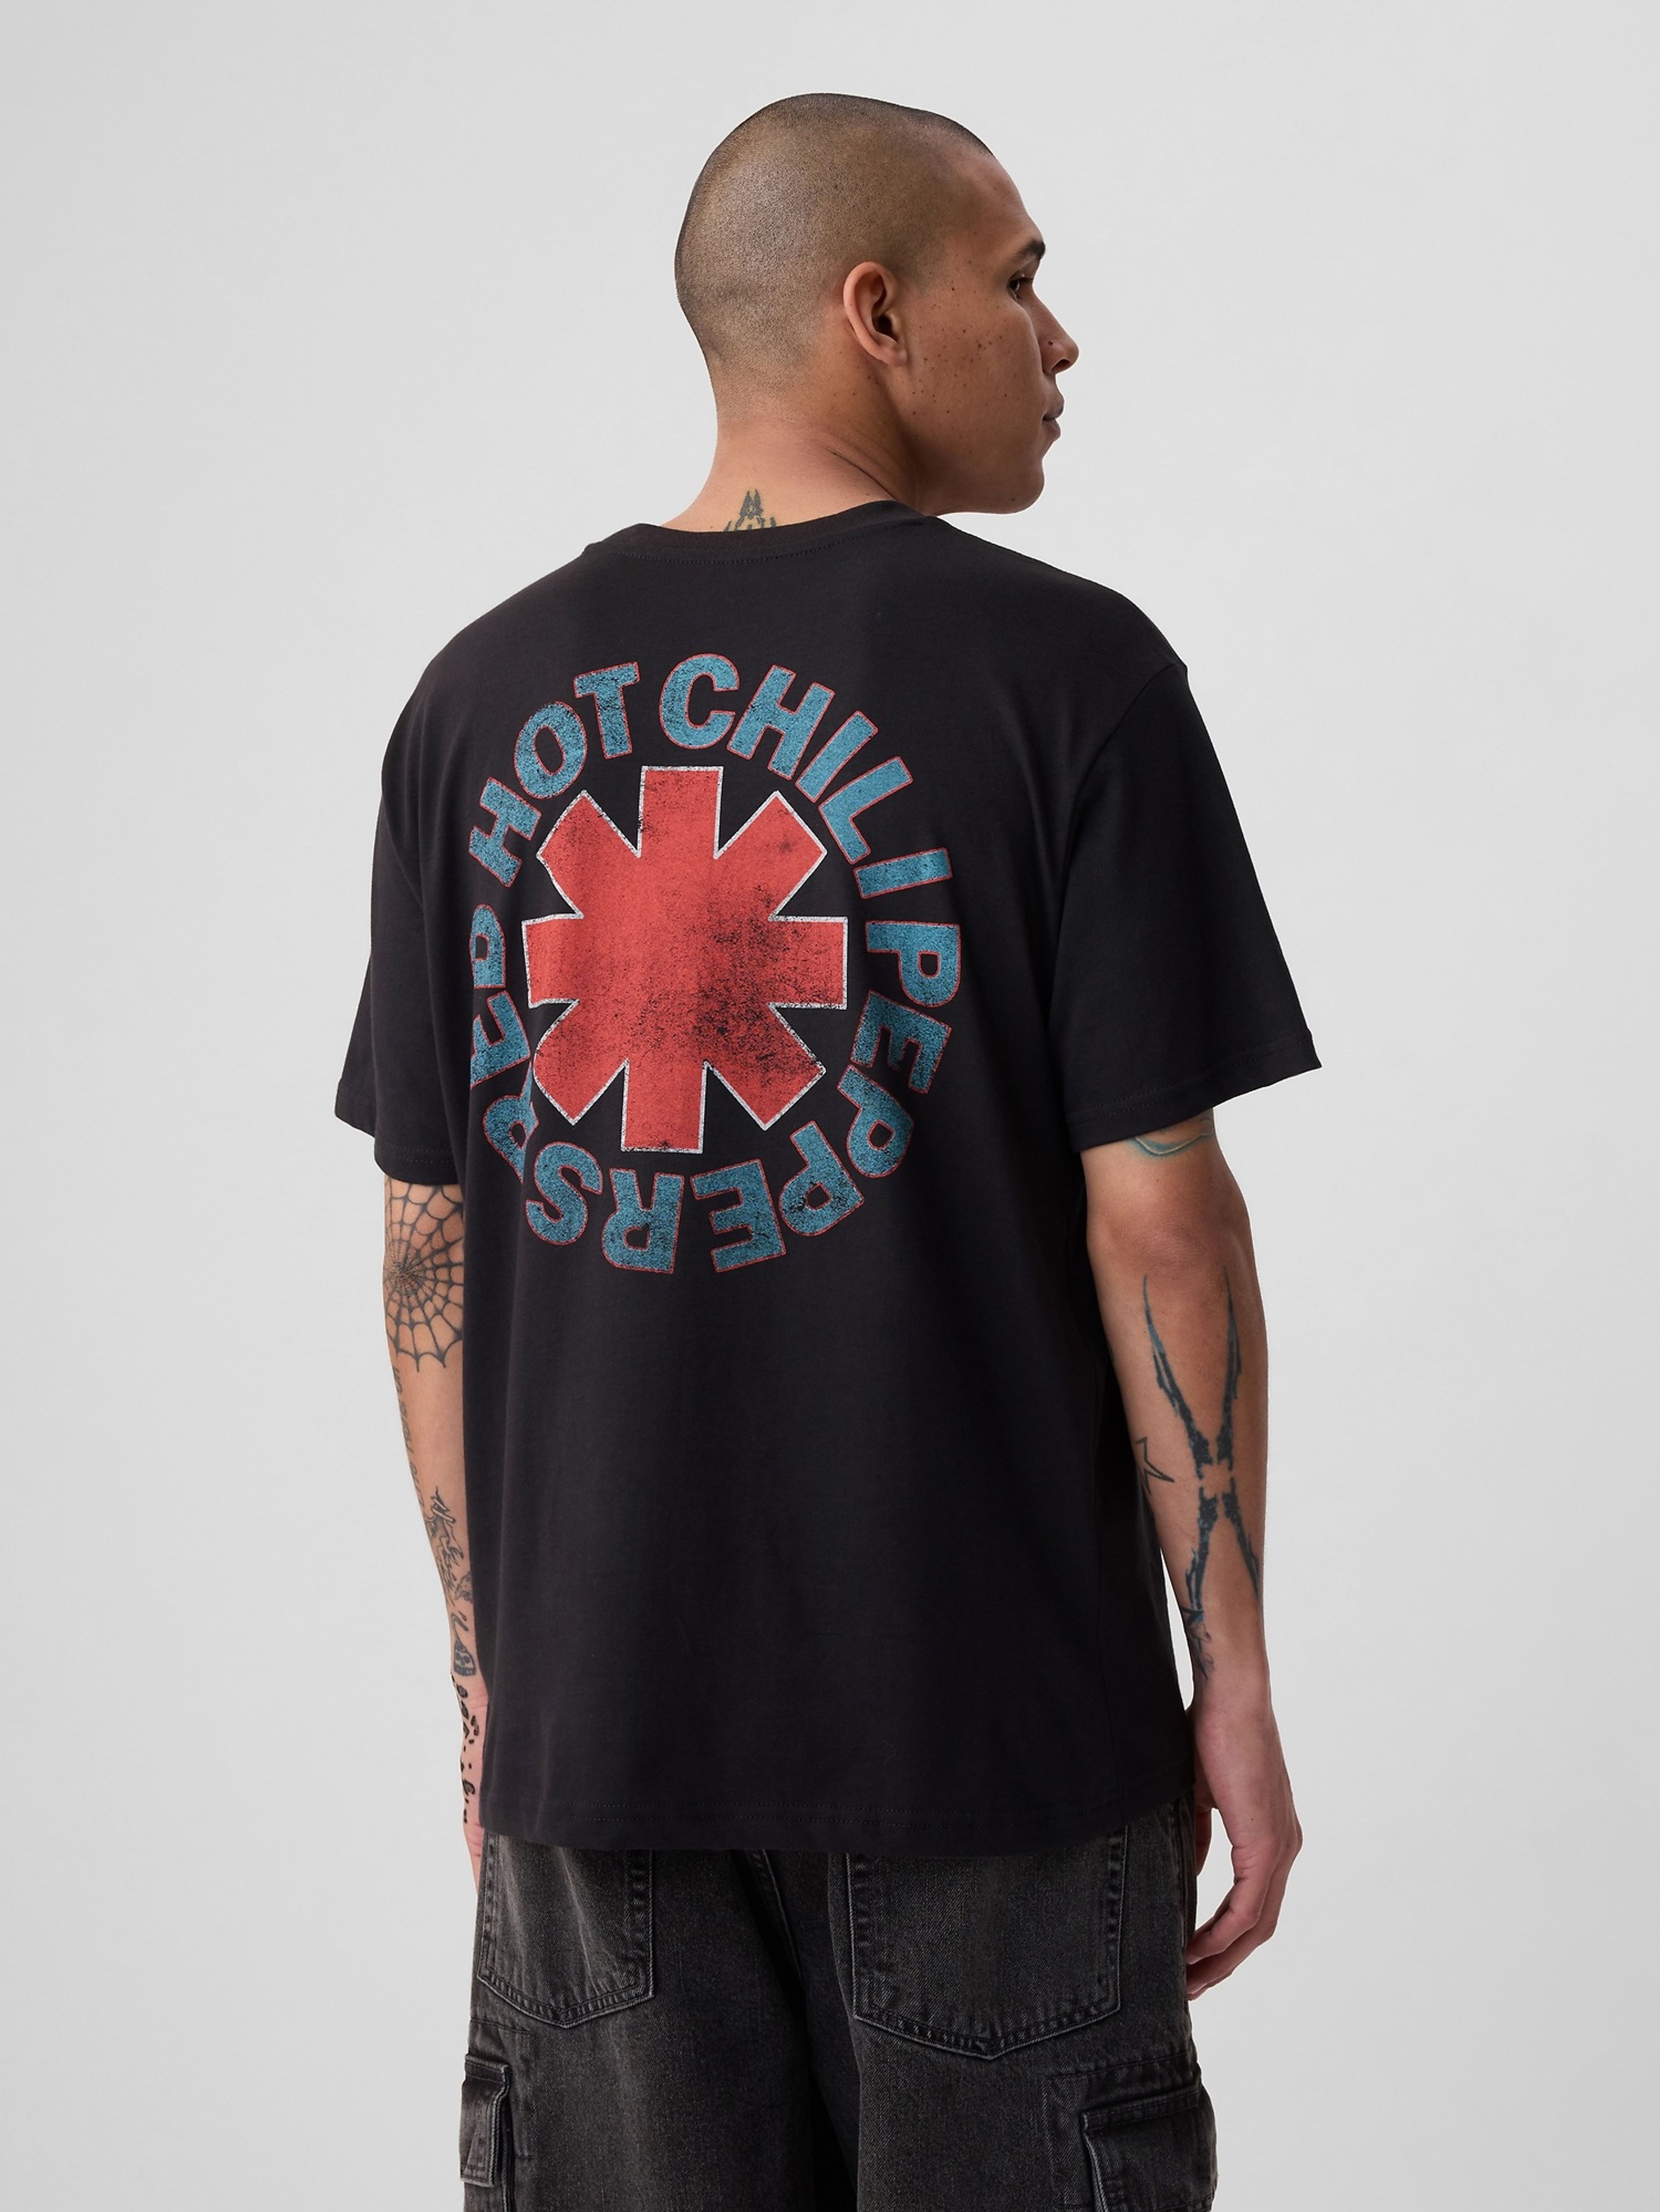 Red Hot Chili Peppers T-Shirt Unisex